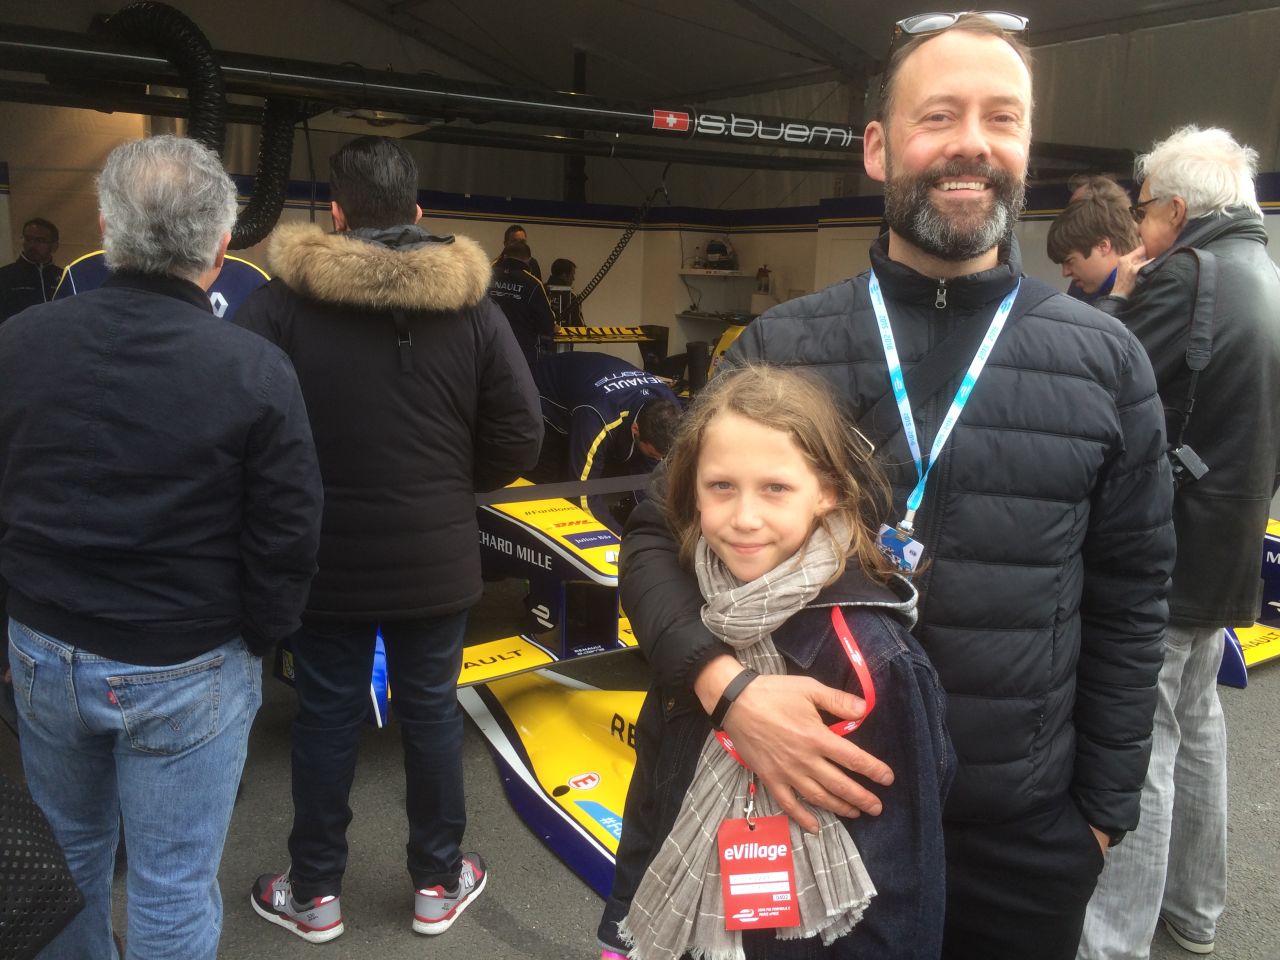 "Formula E is what got me into cars," explains Milo from London, who is seen outside the garage of his favorite driver, Sebastien Buemi, in Paris. Dad Hector says his son discovered Formula E by watching online.